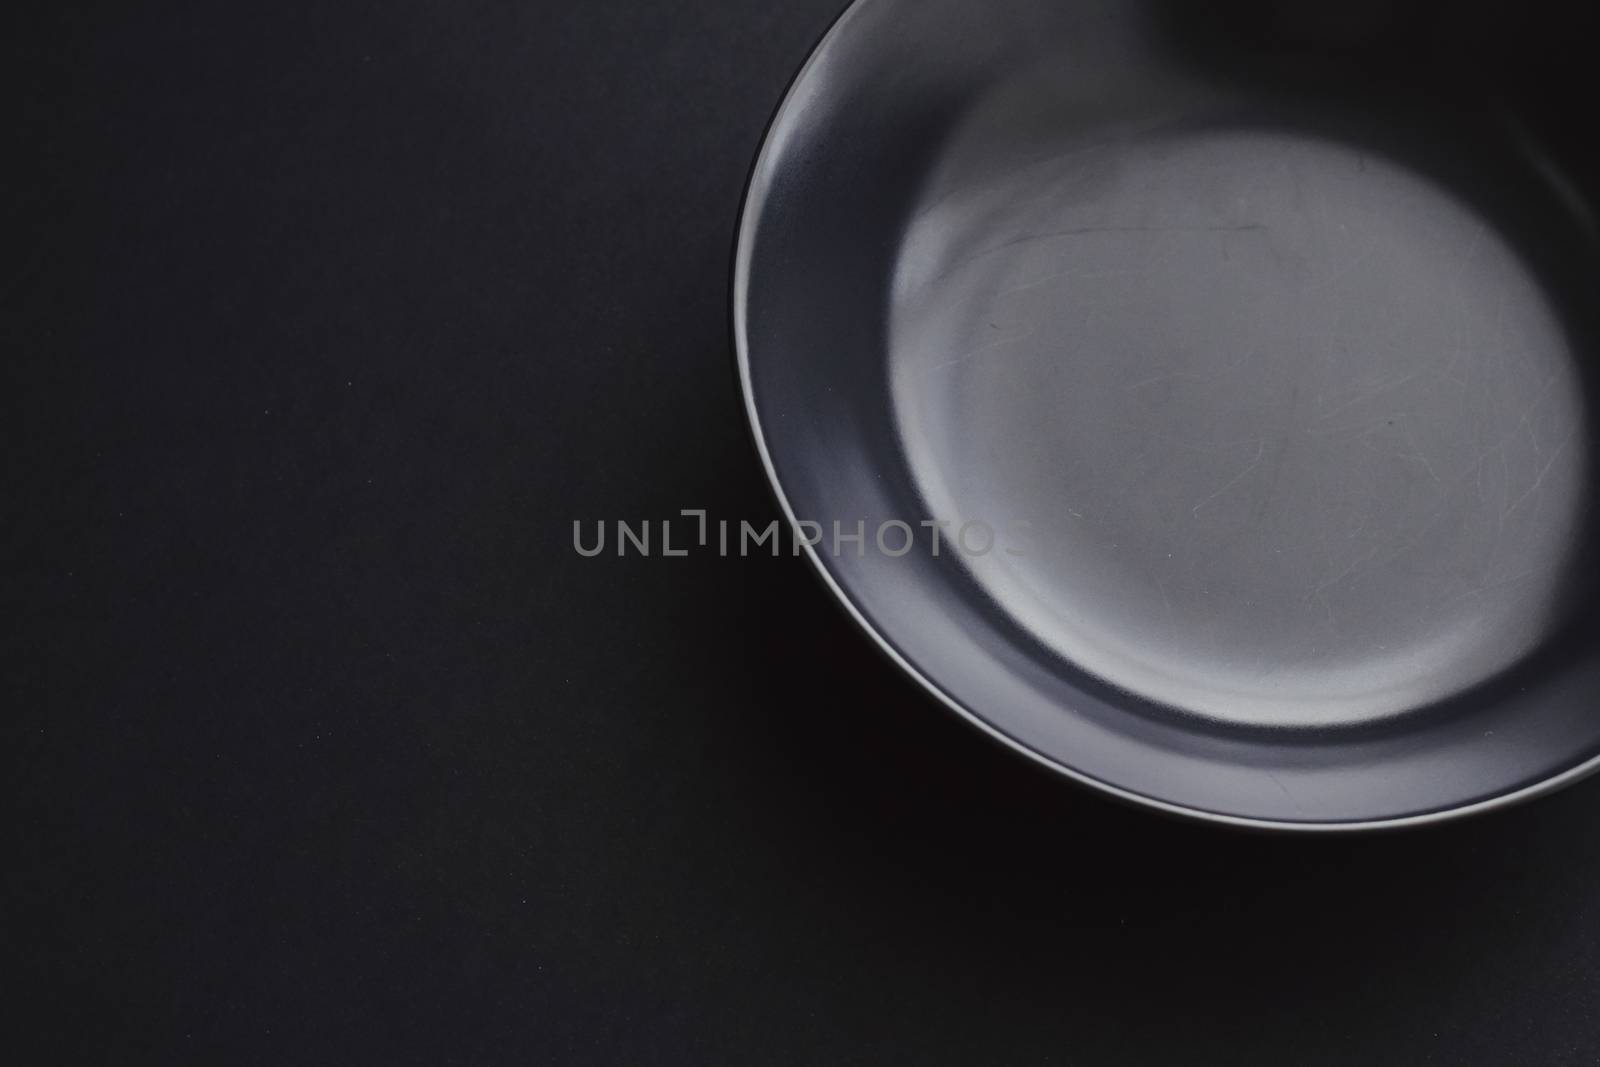 Empty plates on black background, premium dishware for holiday dinner, minimalistic design and diet concept